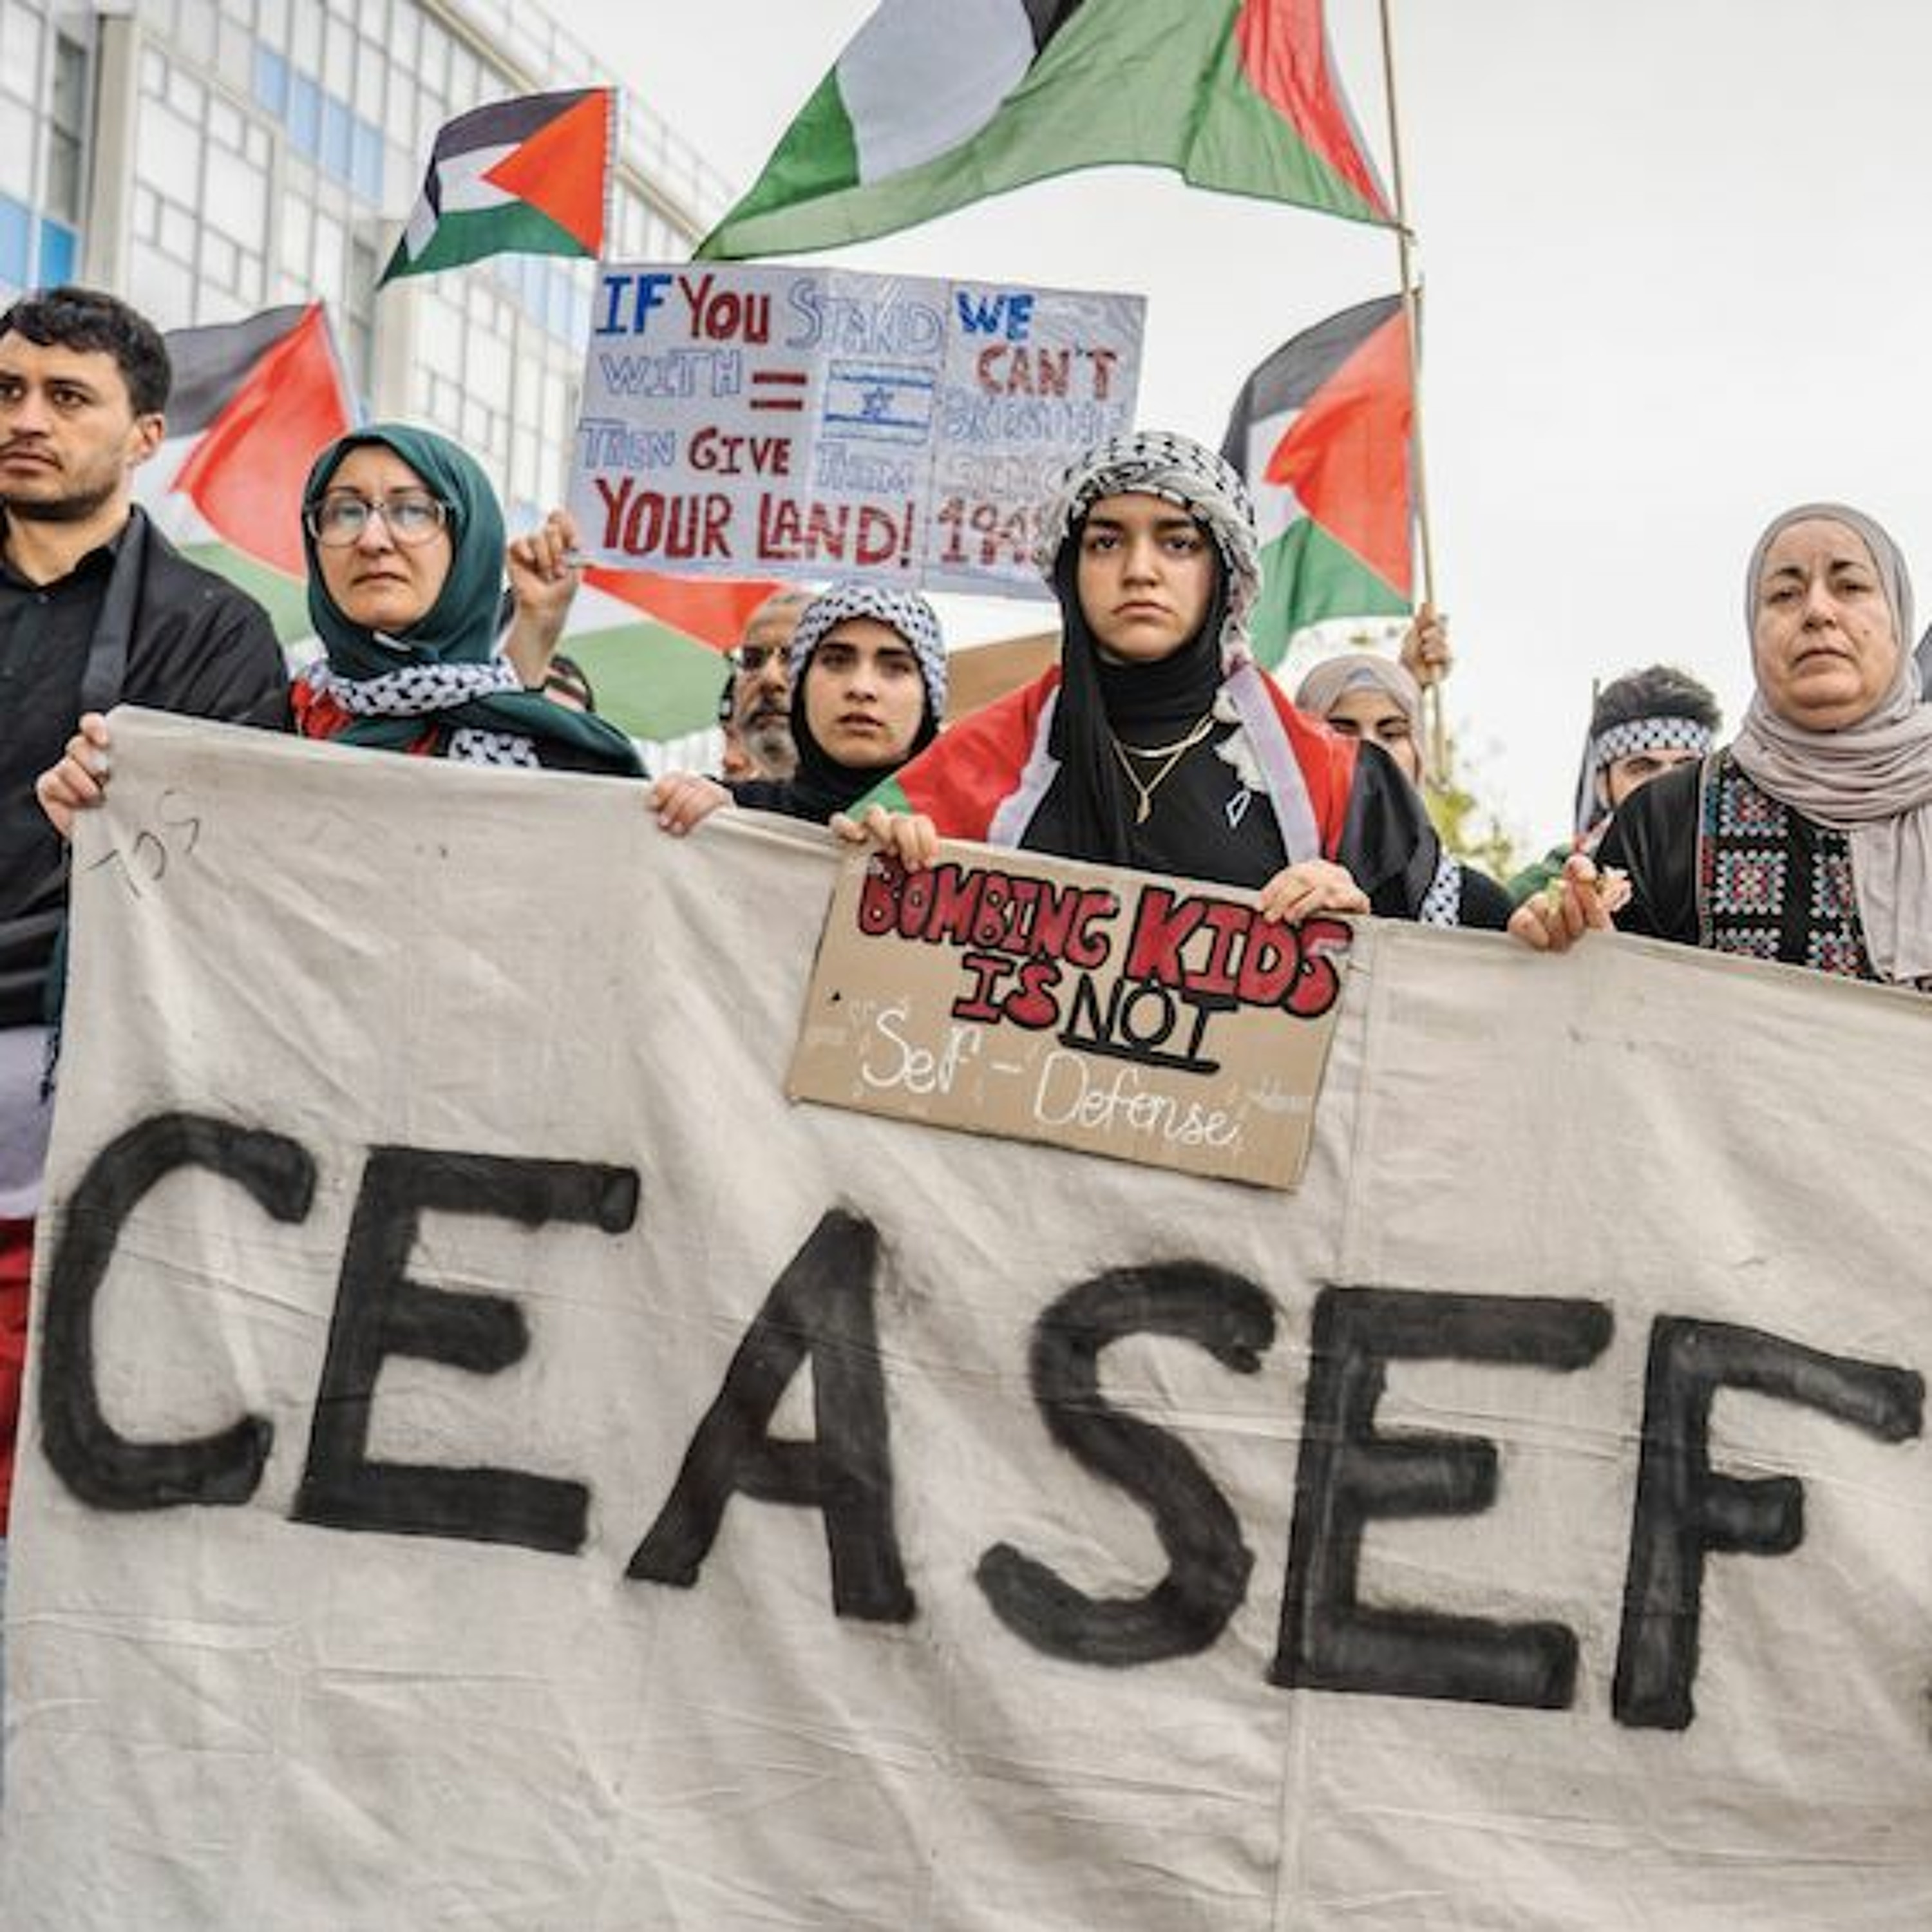 As Support For Gaza Goes Mainstream, Don't Let The Empire Co-Opt The Movement